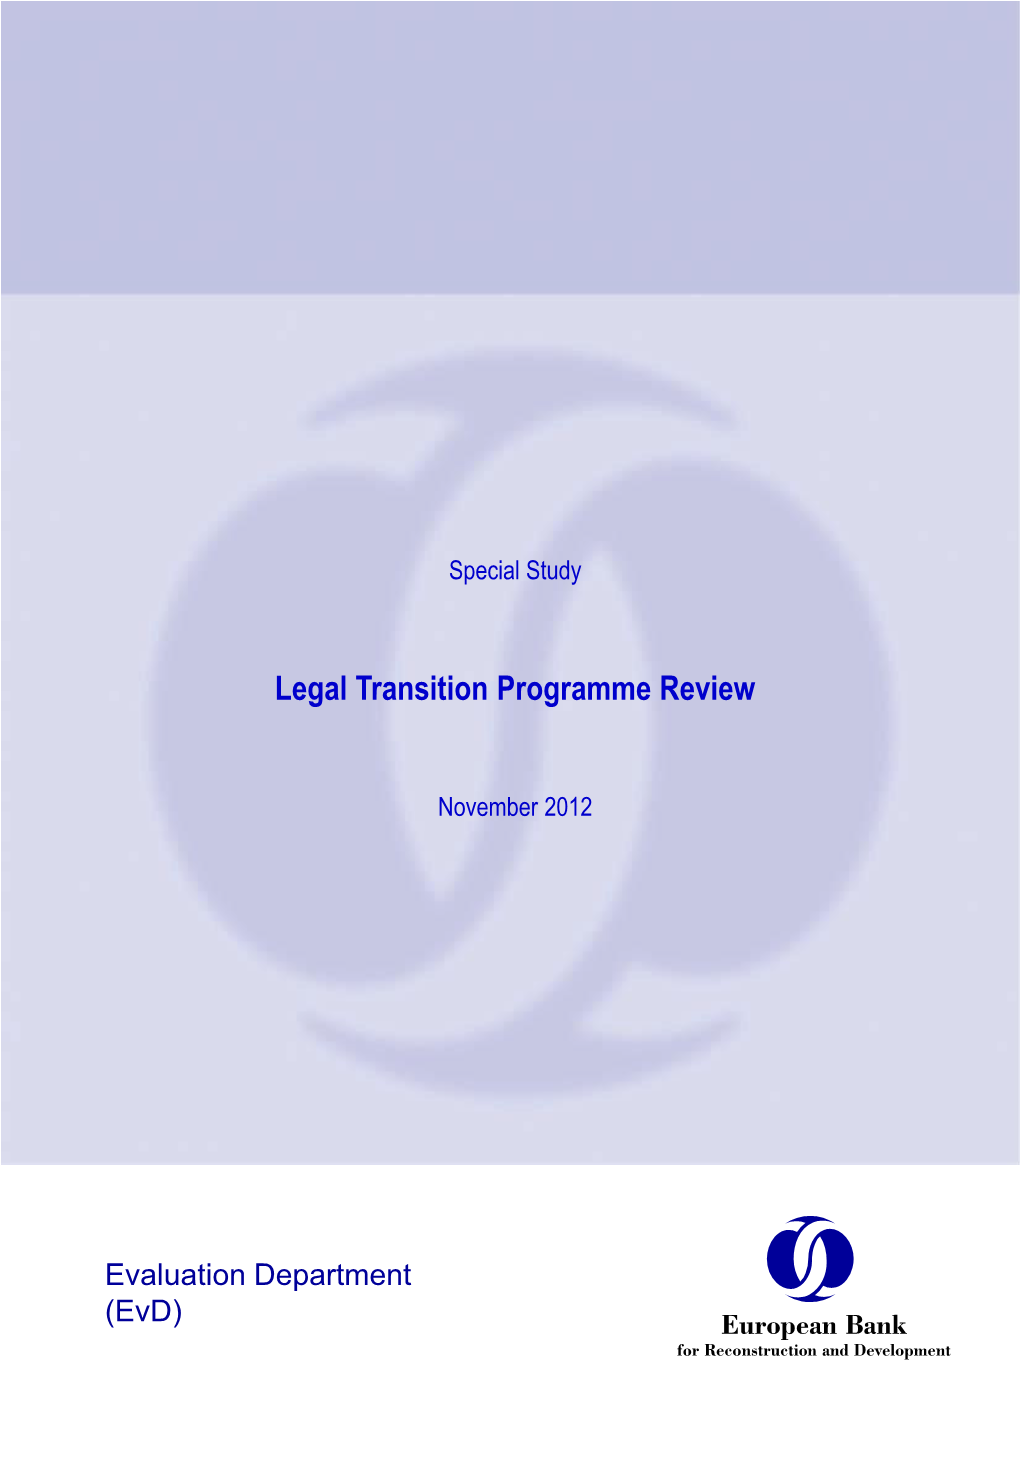 Legal Transition Programme Review